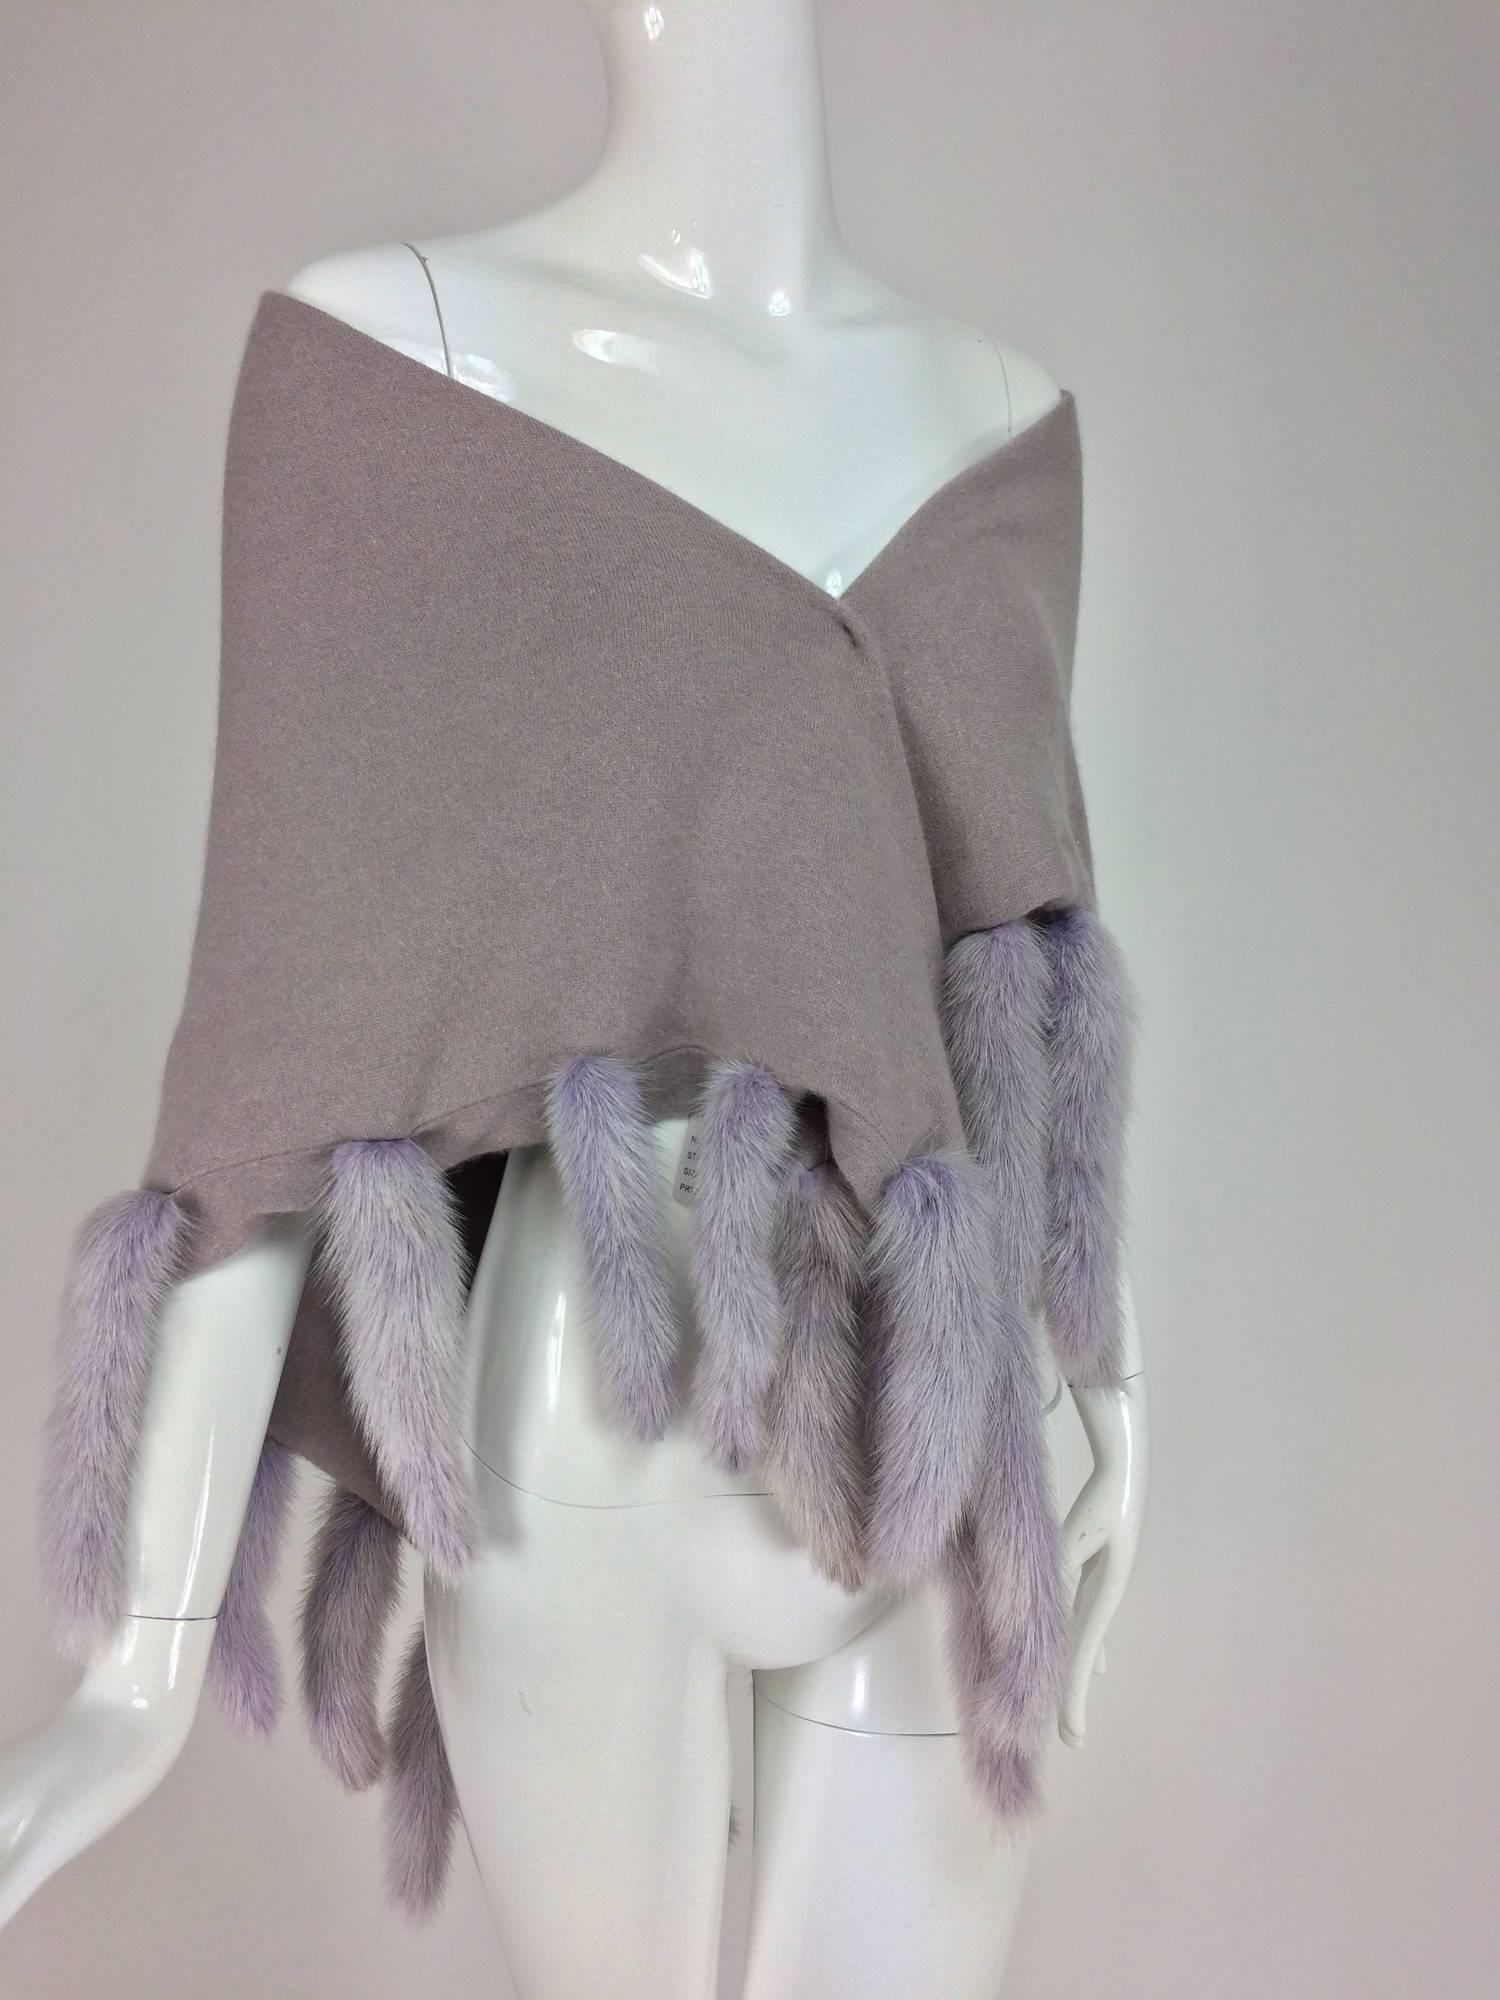 Lavender soft wool and angora knit shawl with mink tails...Triangular shawl is double thickness, it is trimmed on 3 sides with mink tails, the knit shawl is pale lavender and the mink tails are a coordinating shade of lavender...In very good